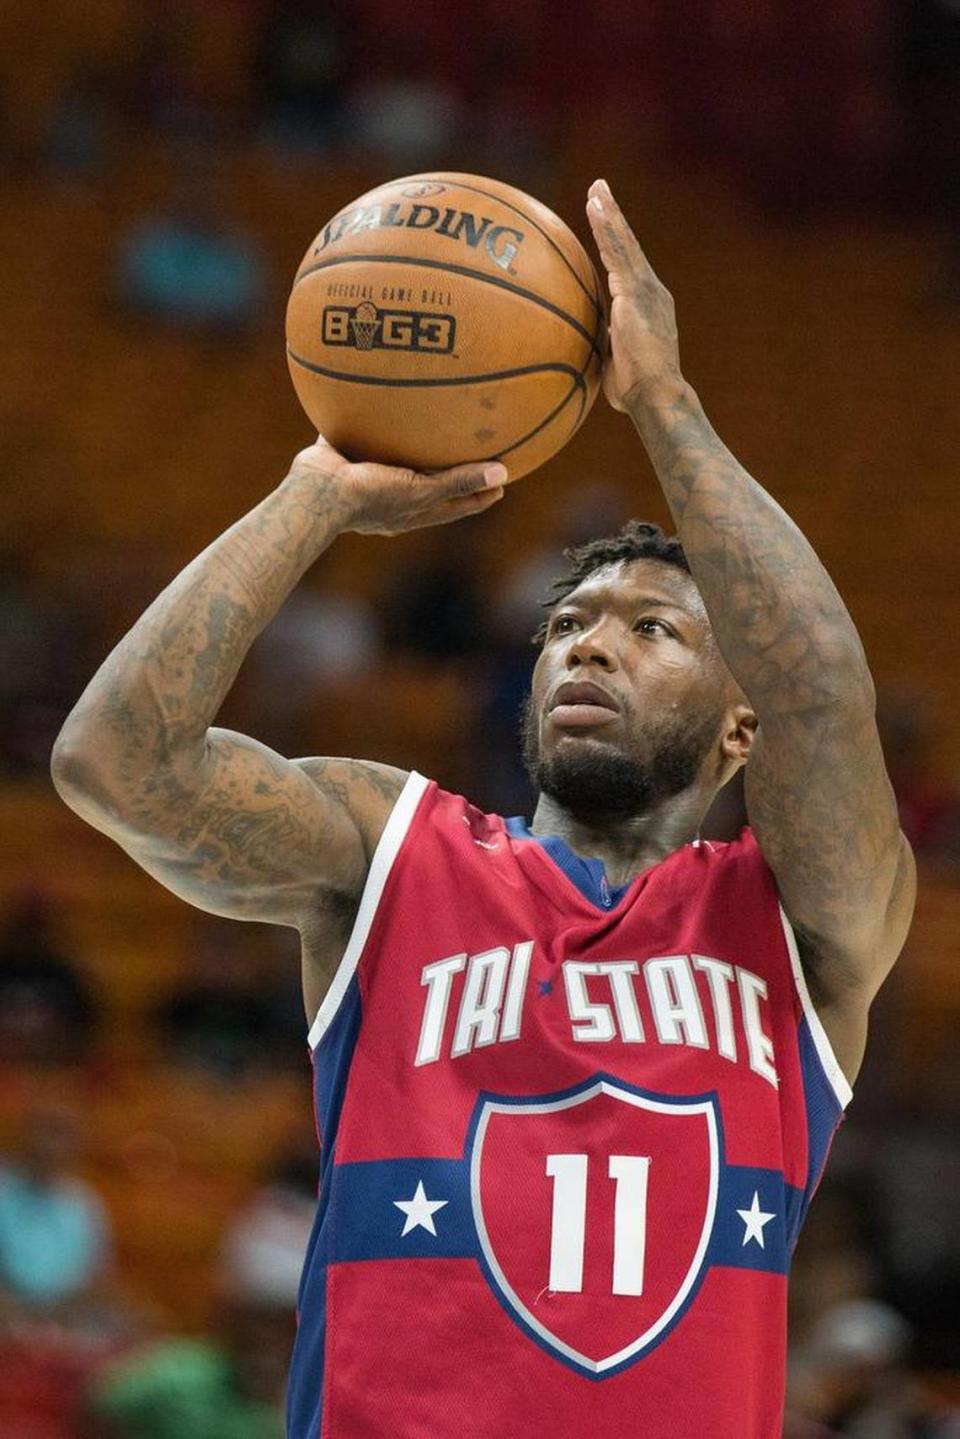 Nate Robinson (11) attempts a jump shot against Ghost Ballers during the first half of a Big3 basketball game at AmericanAirlines Arena on Friday, July 20, 2018.